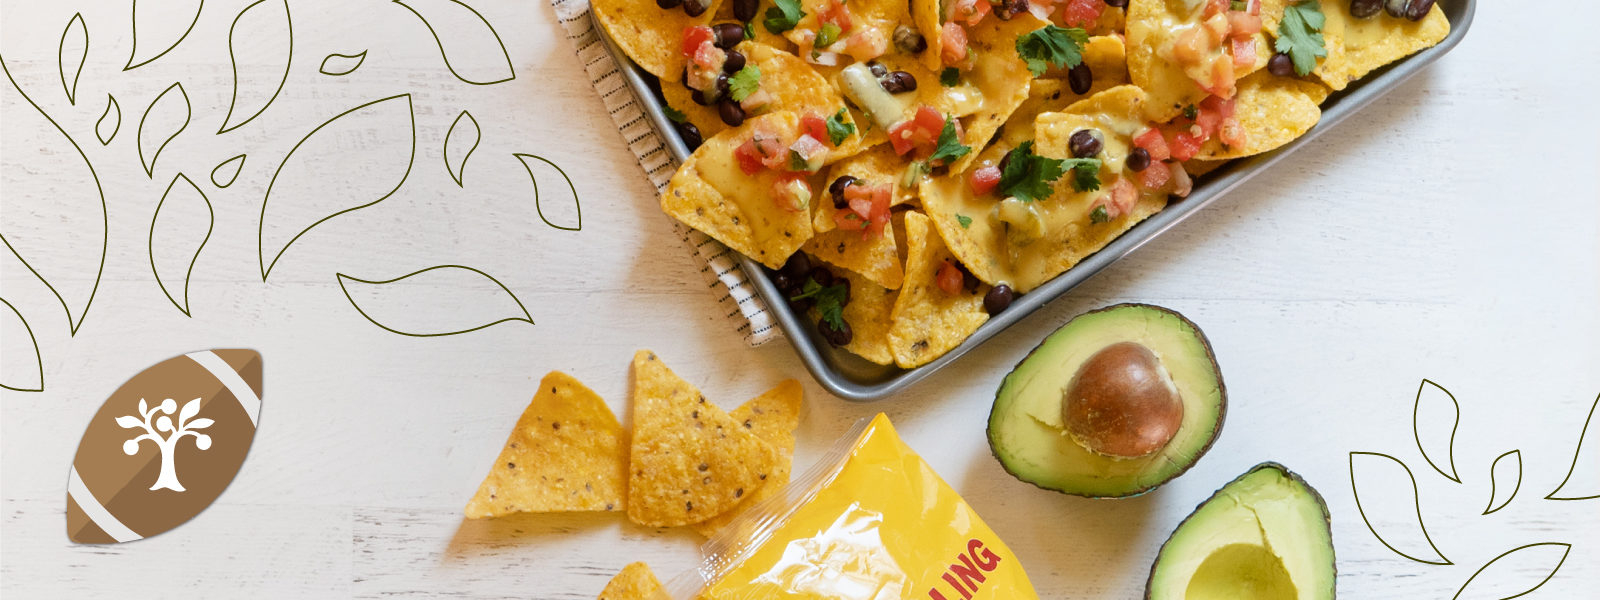 A photo of avocados and nachos, with a small football graphic in the corner